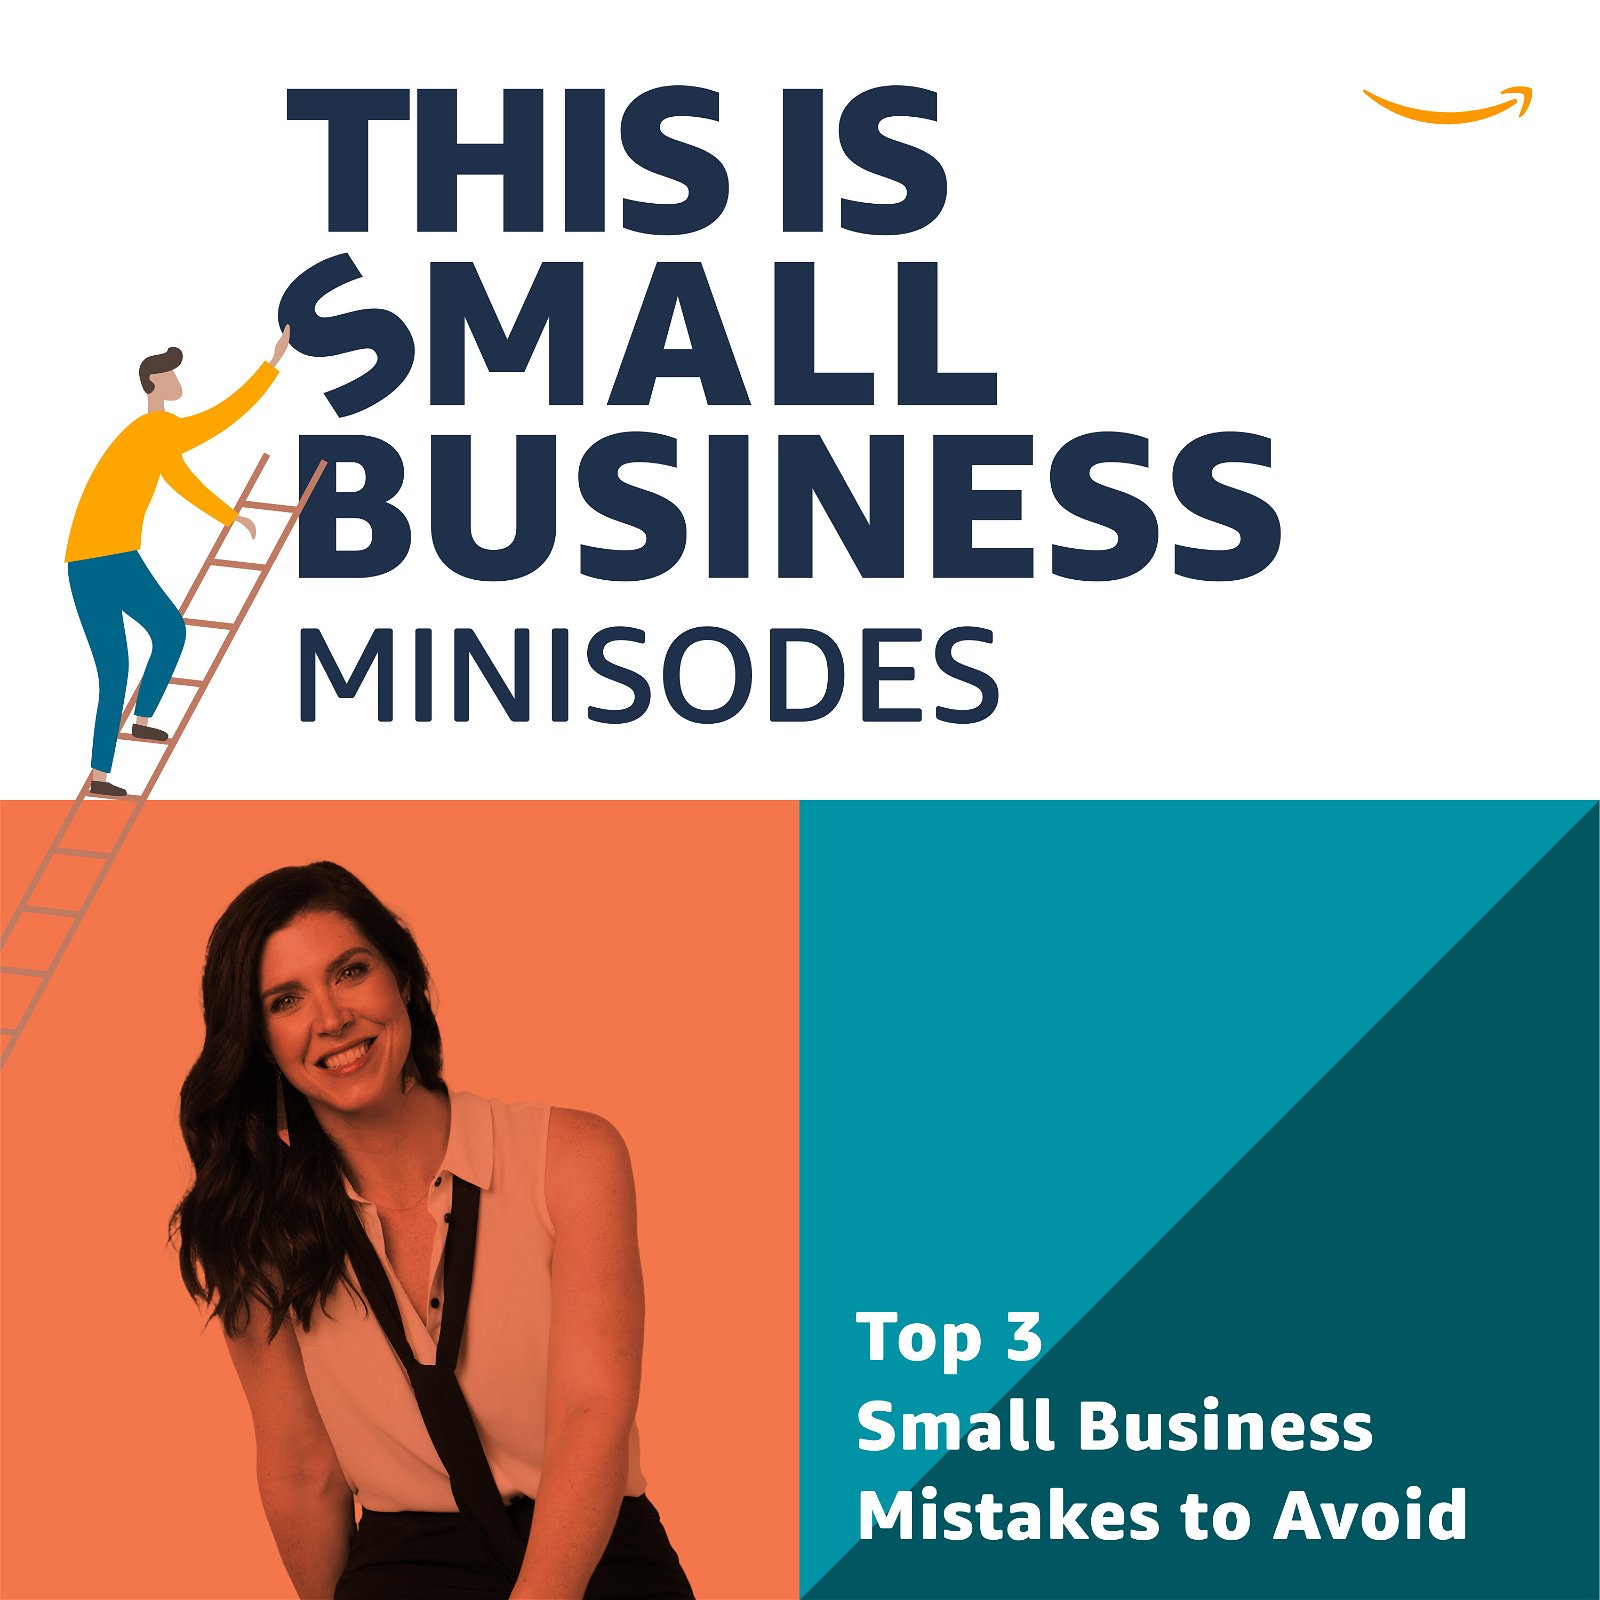 Top 3 Small Business Mistakes to Avoid